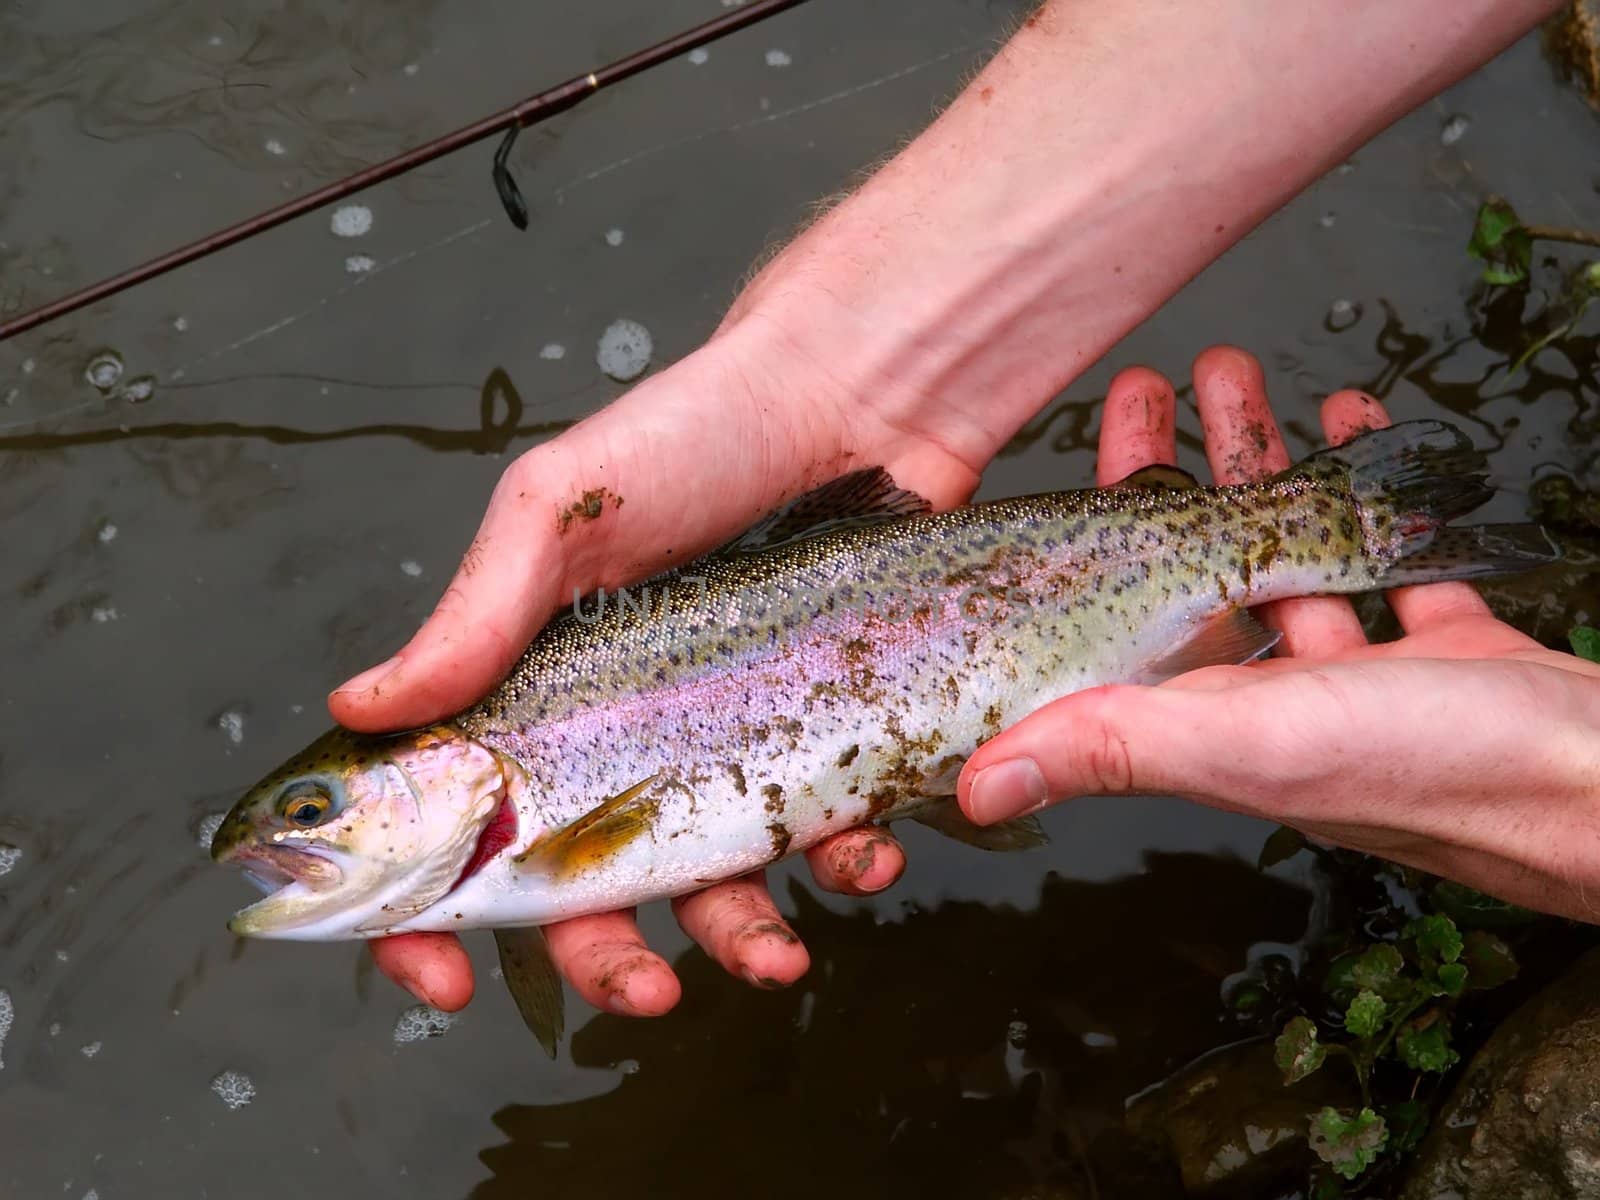 A Rainbow Trout (Oncorhynchus mykiss) caught at Apple River Canyon State Park in Illinois.